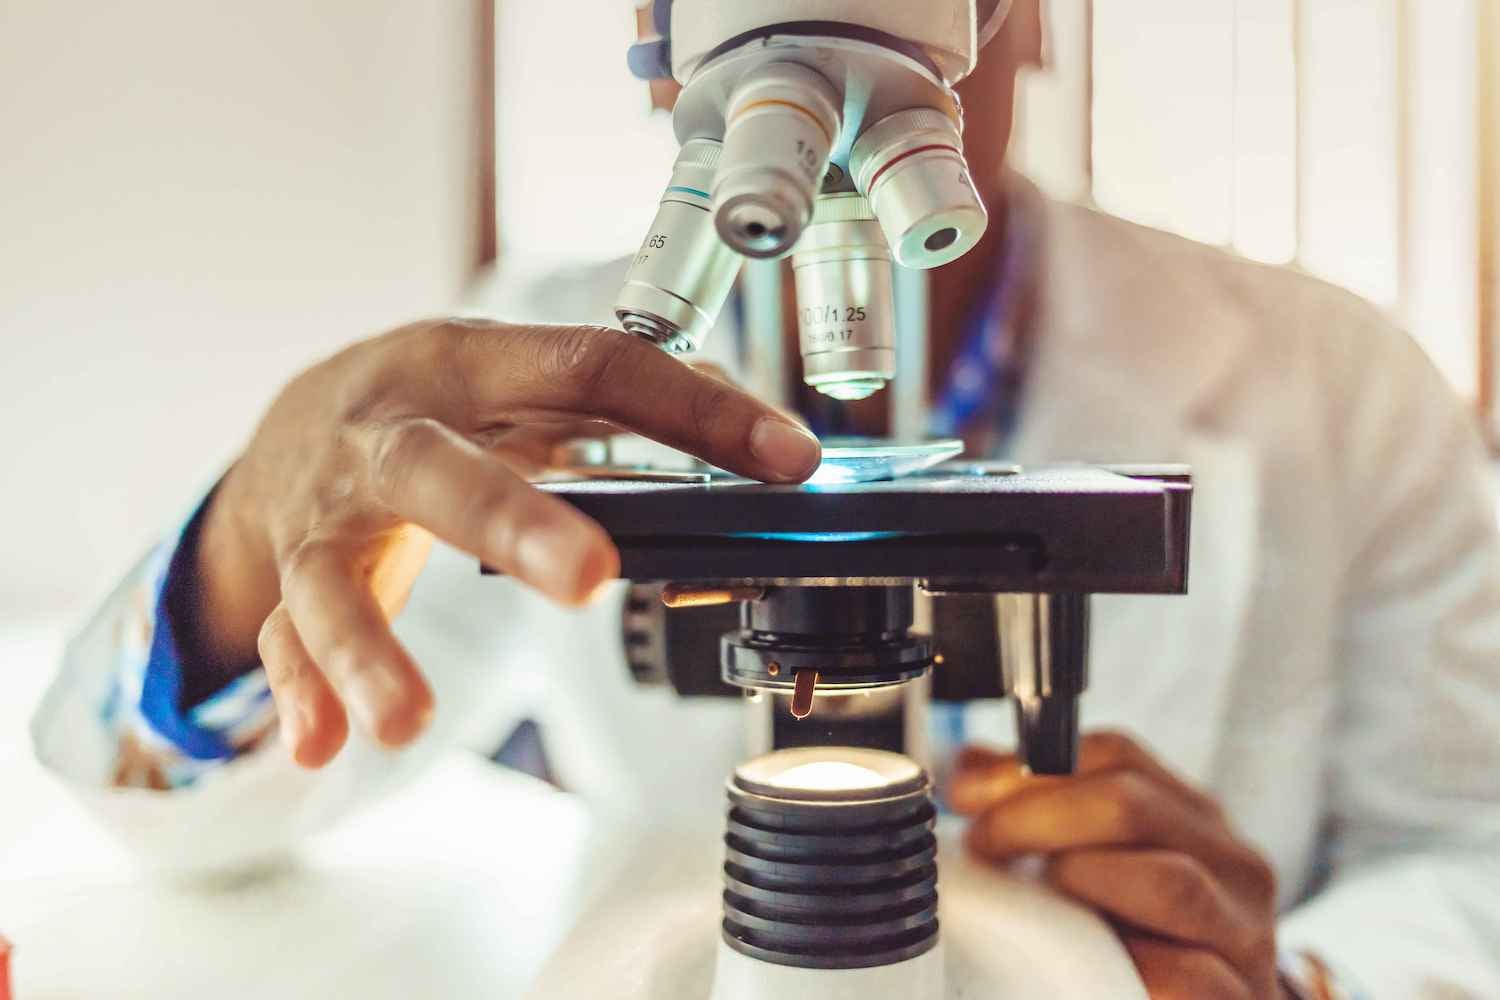 Doctor using a microscope to examine a medical specimen